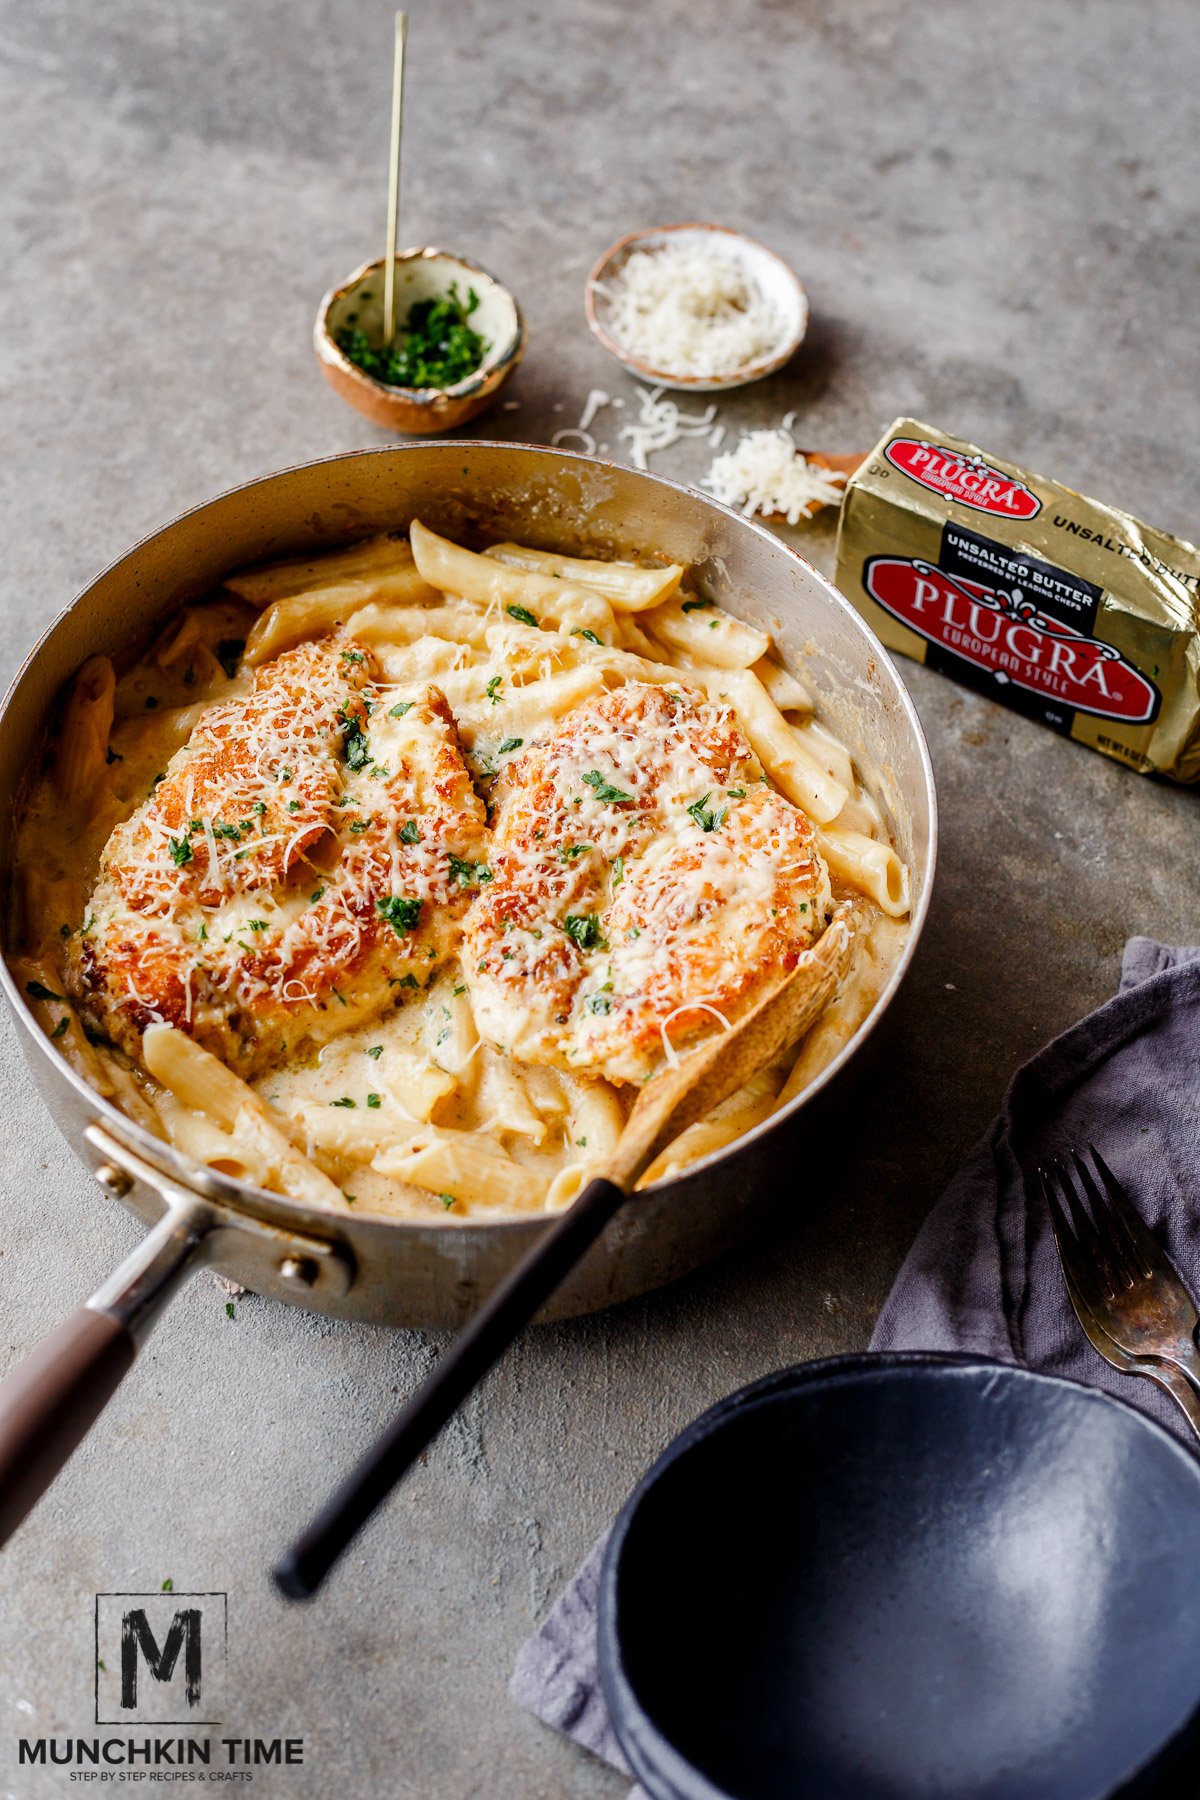 Oven Baked Chicken Pasta in Buttery White Sauce inside the skillet with a wooden spoon and a plate on the side.